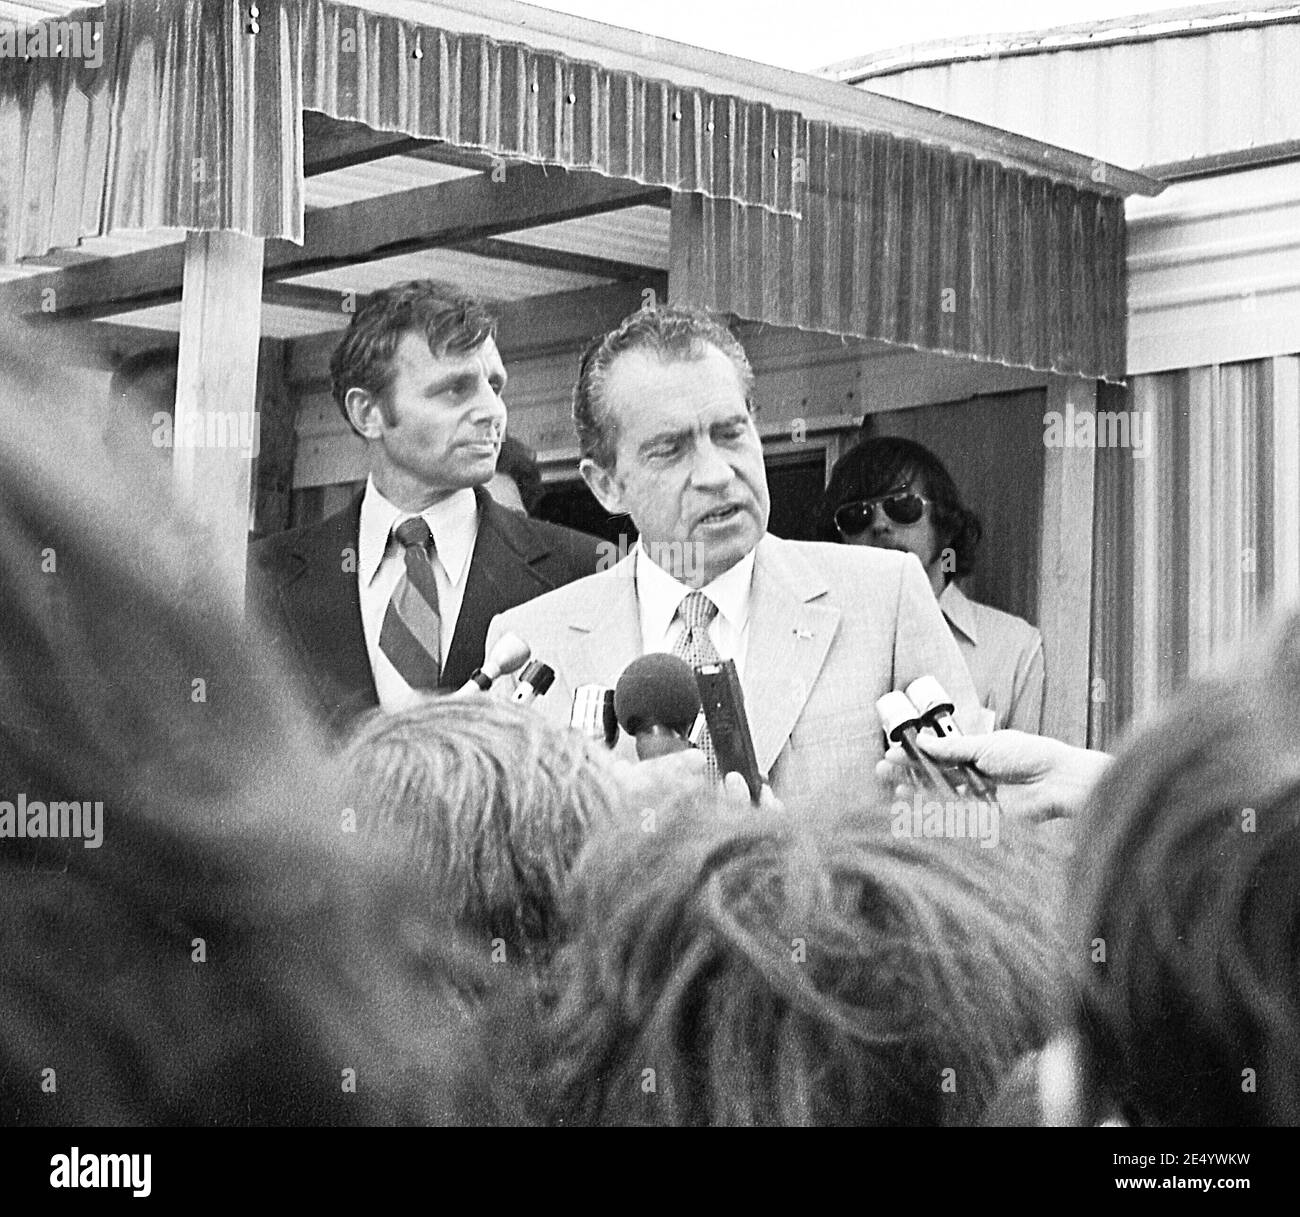 Sept. 9, 1972 President Richard Nixon makes a surprise visit to the flood damaged community of Wilkes Barre, Pennsylvania. Mr. Nixon made the trip with Frank Carlucci, his special assistant in charge of Federal assistance to victims of the tropical storm Agnes. Stock Photo